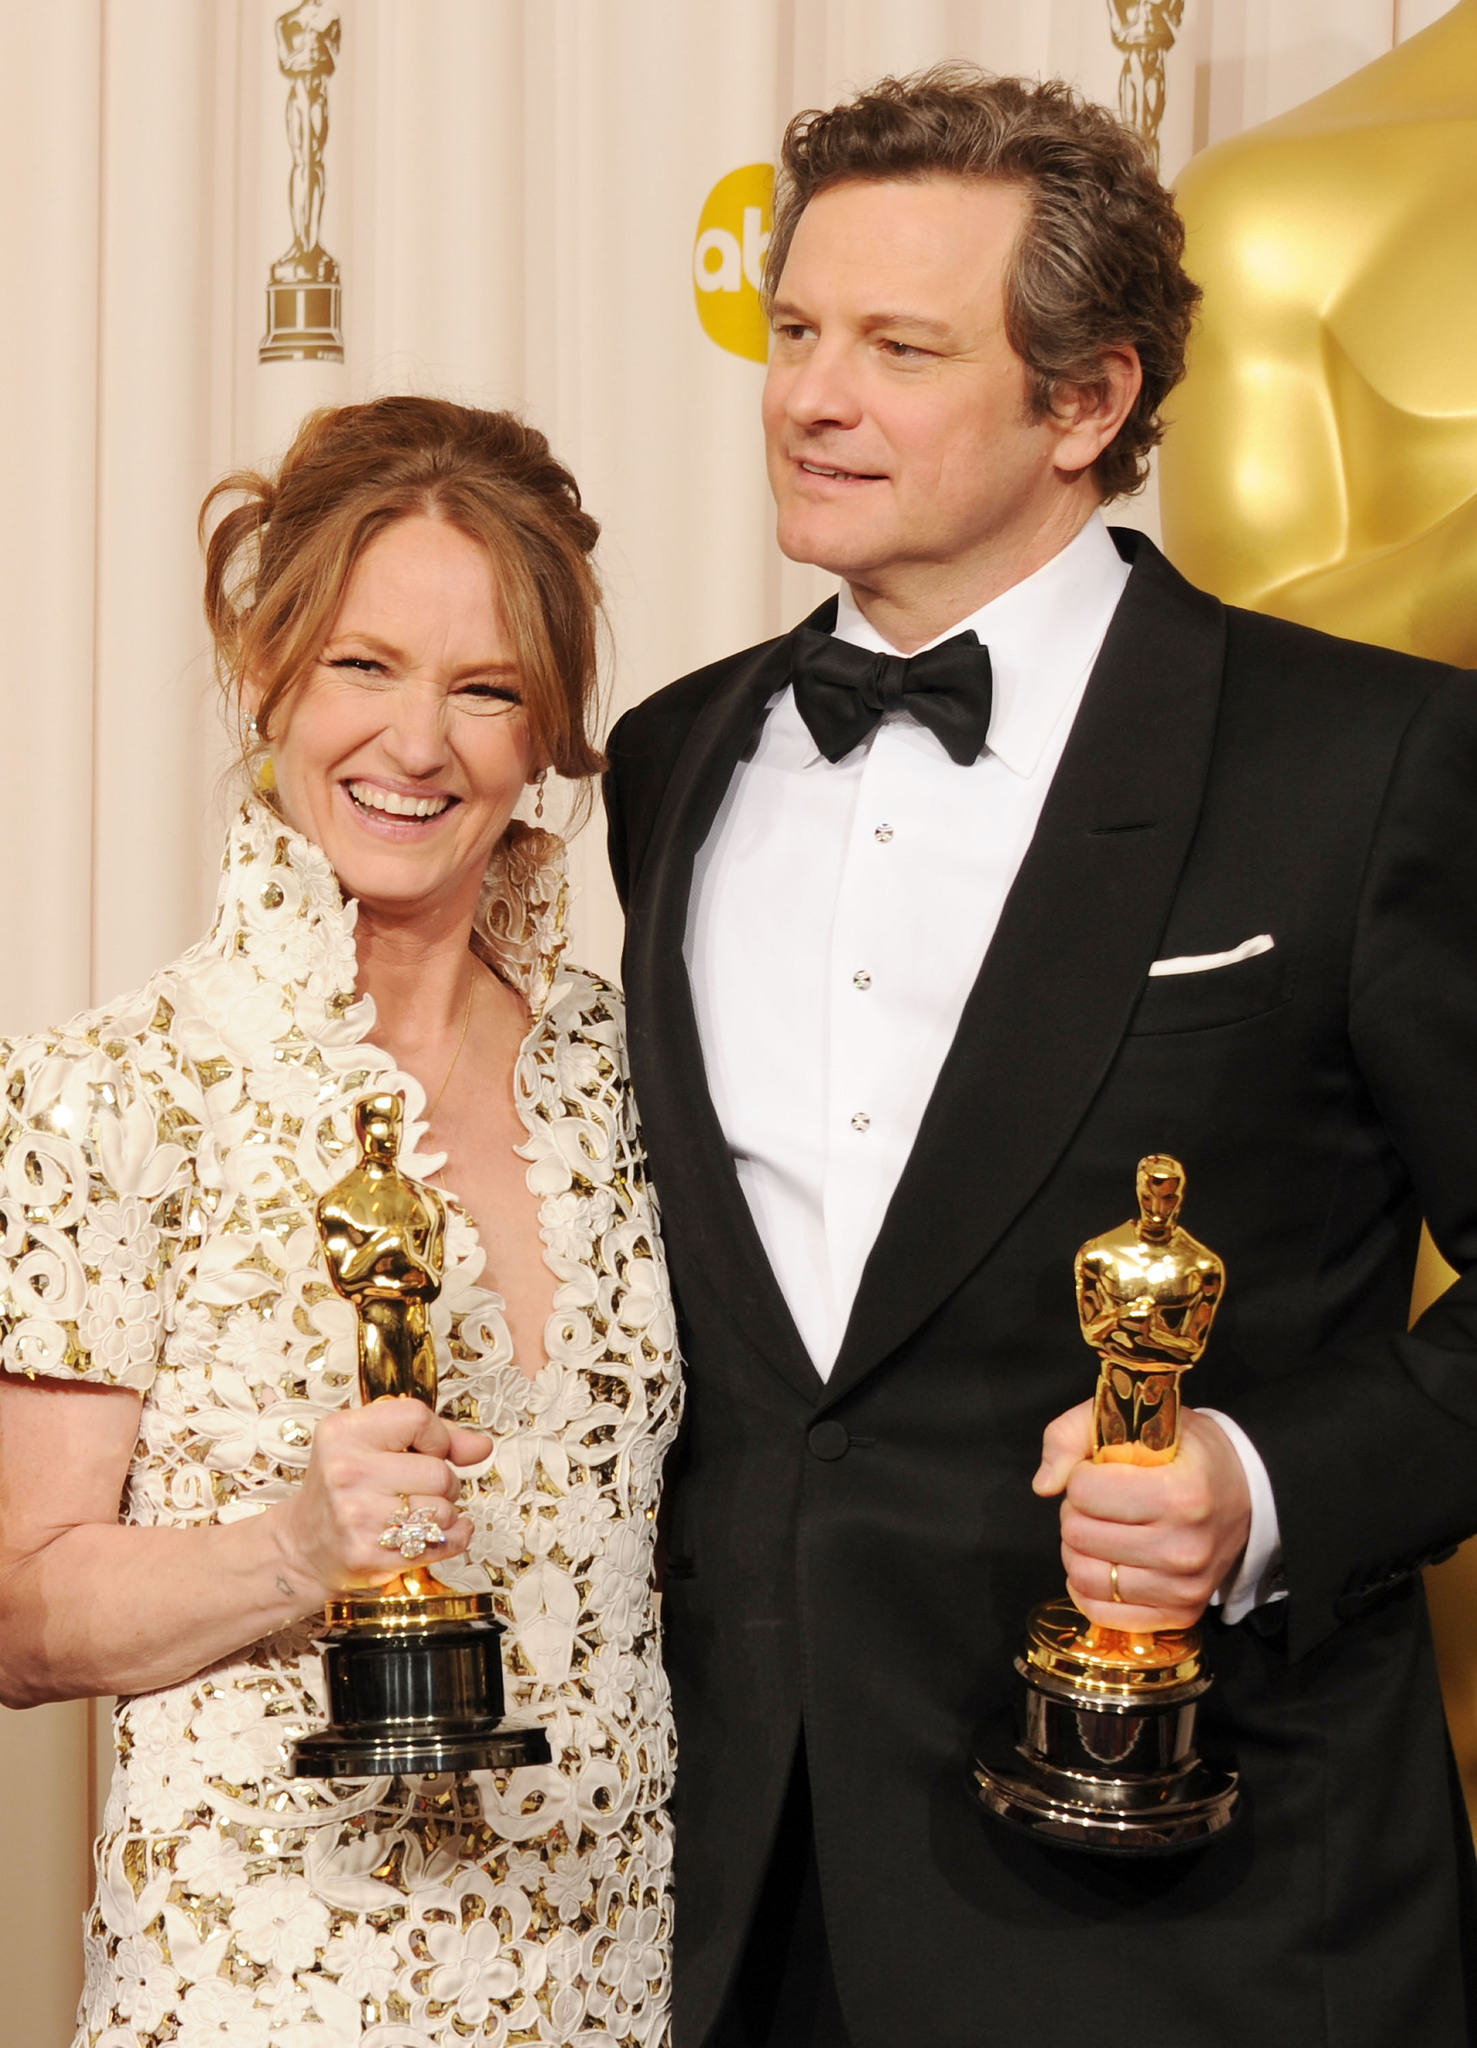 Colin Firth and Melissa Leo